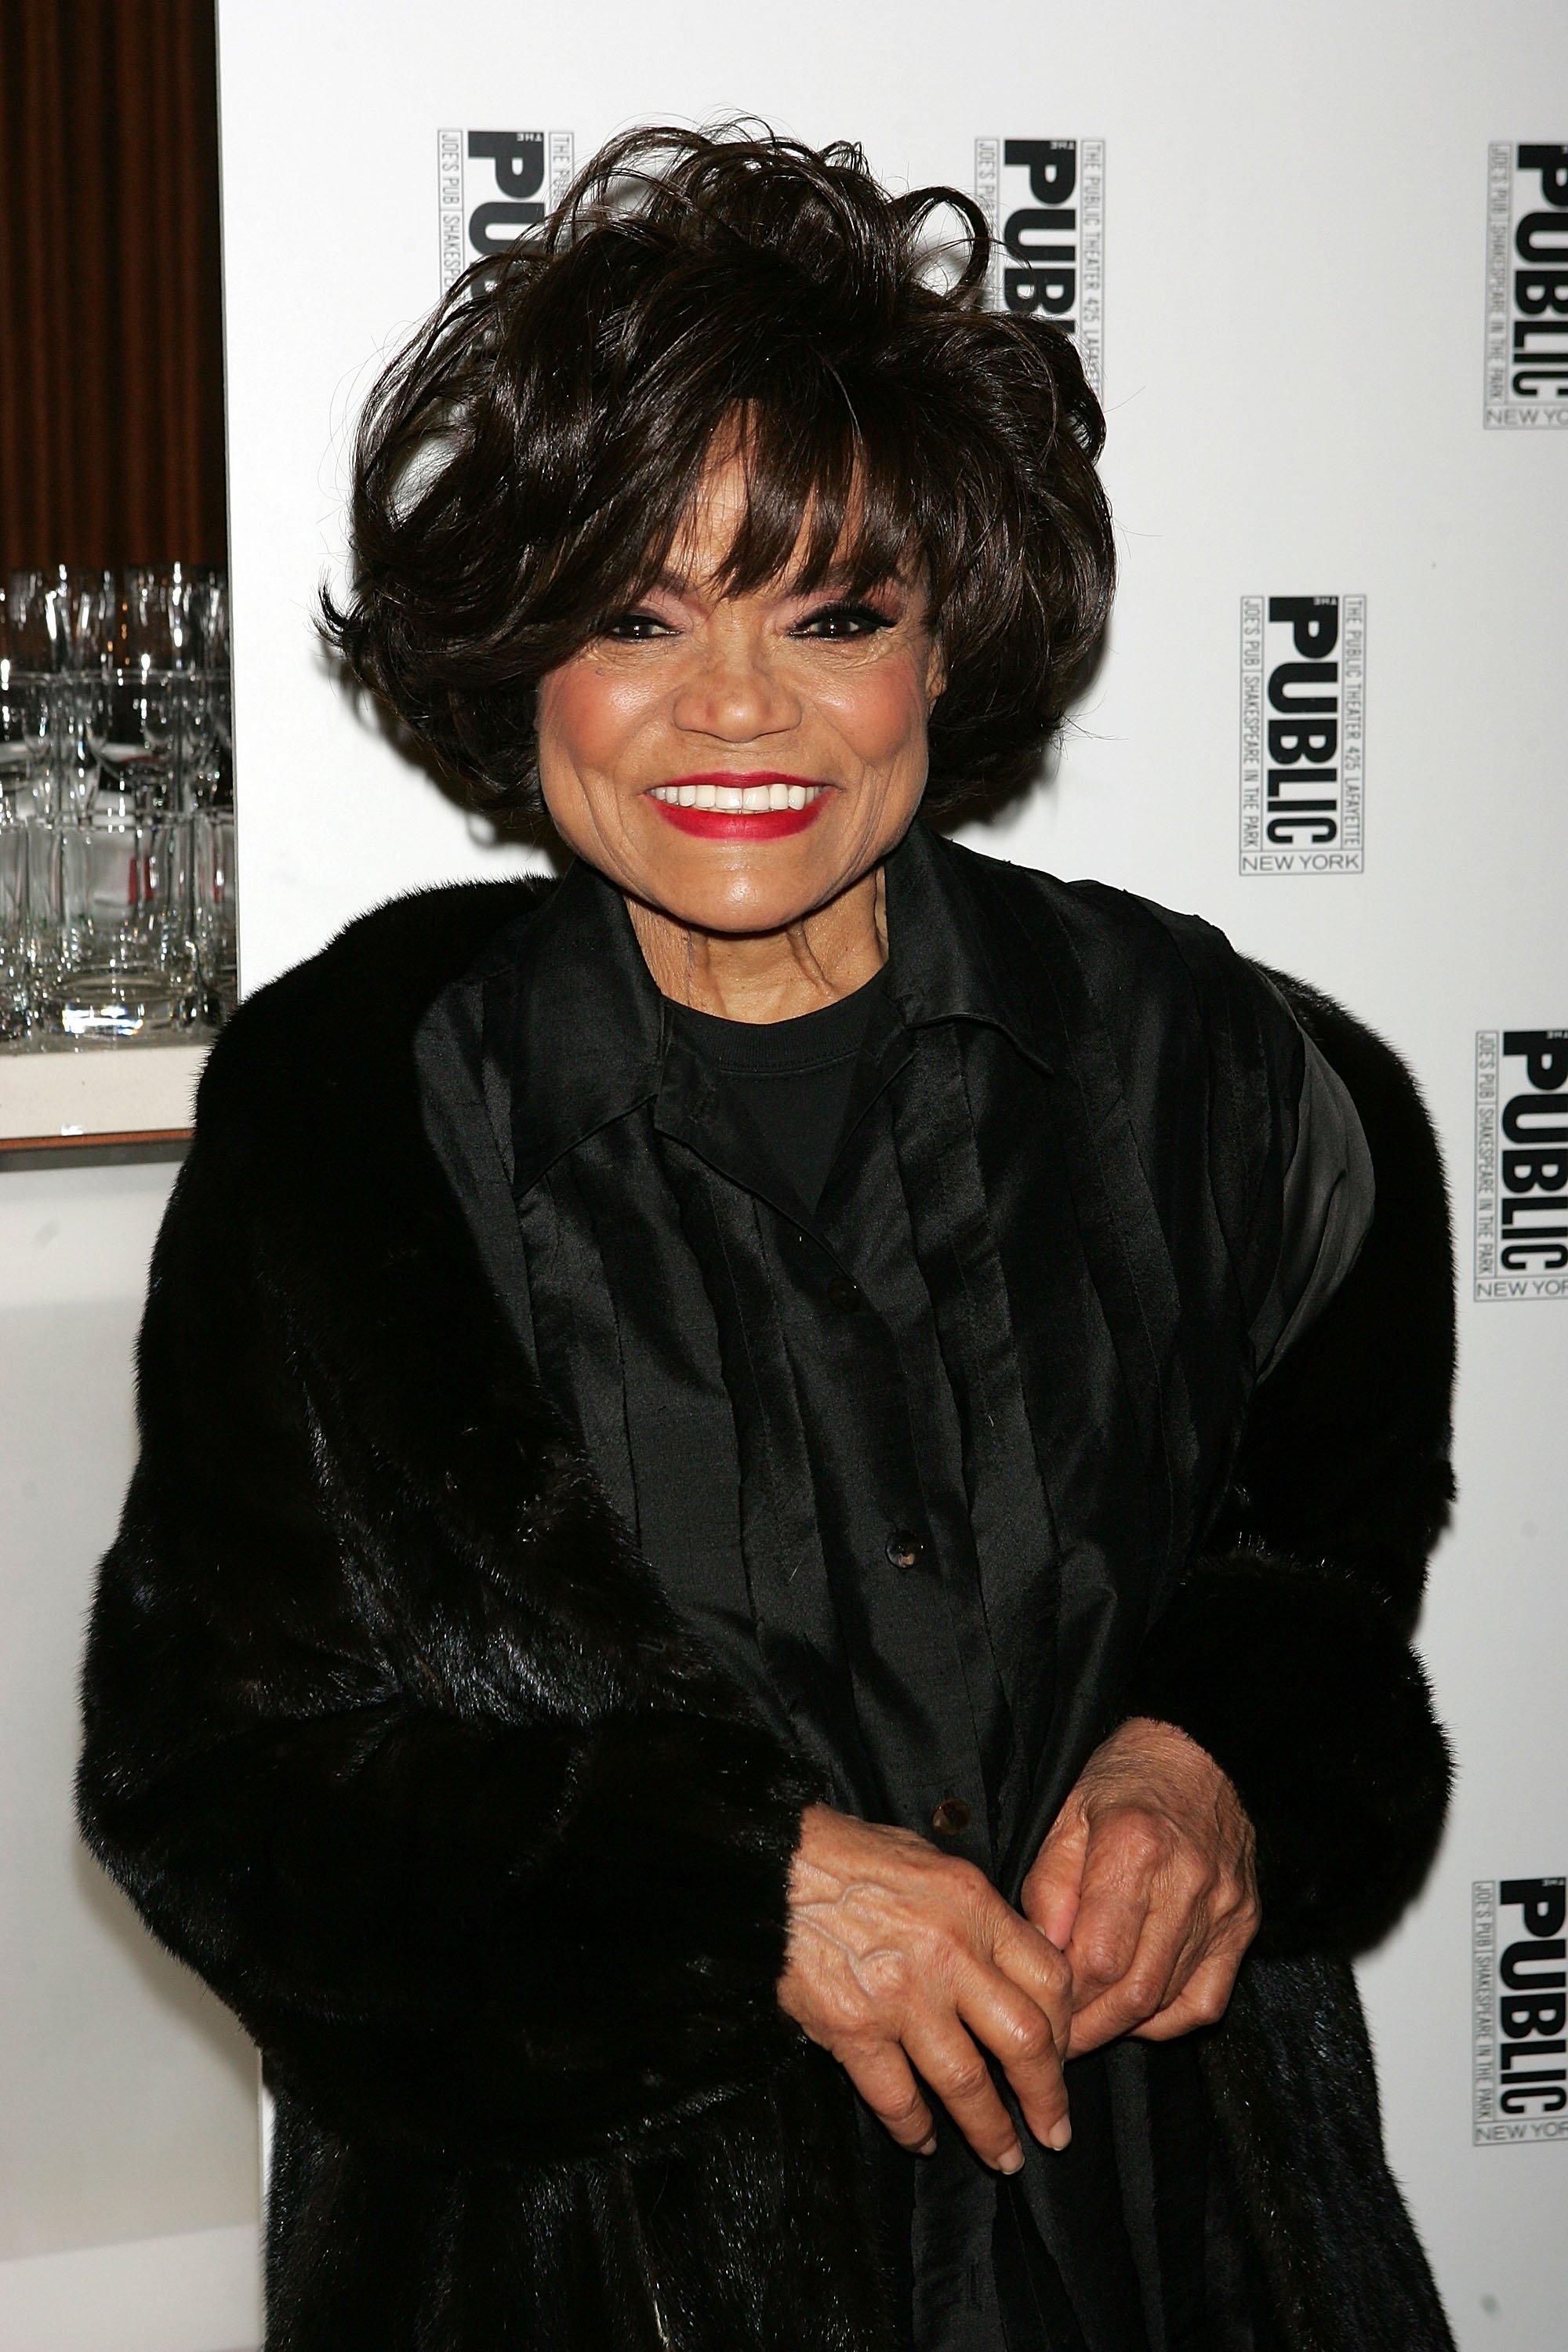 Eartha Kitt arrives at the after party for "The Public Sings: A 50th Anniversary Celebration" at the Time Warner Center January 30, 2006 in New York City | Photo: Getty Images